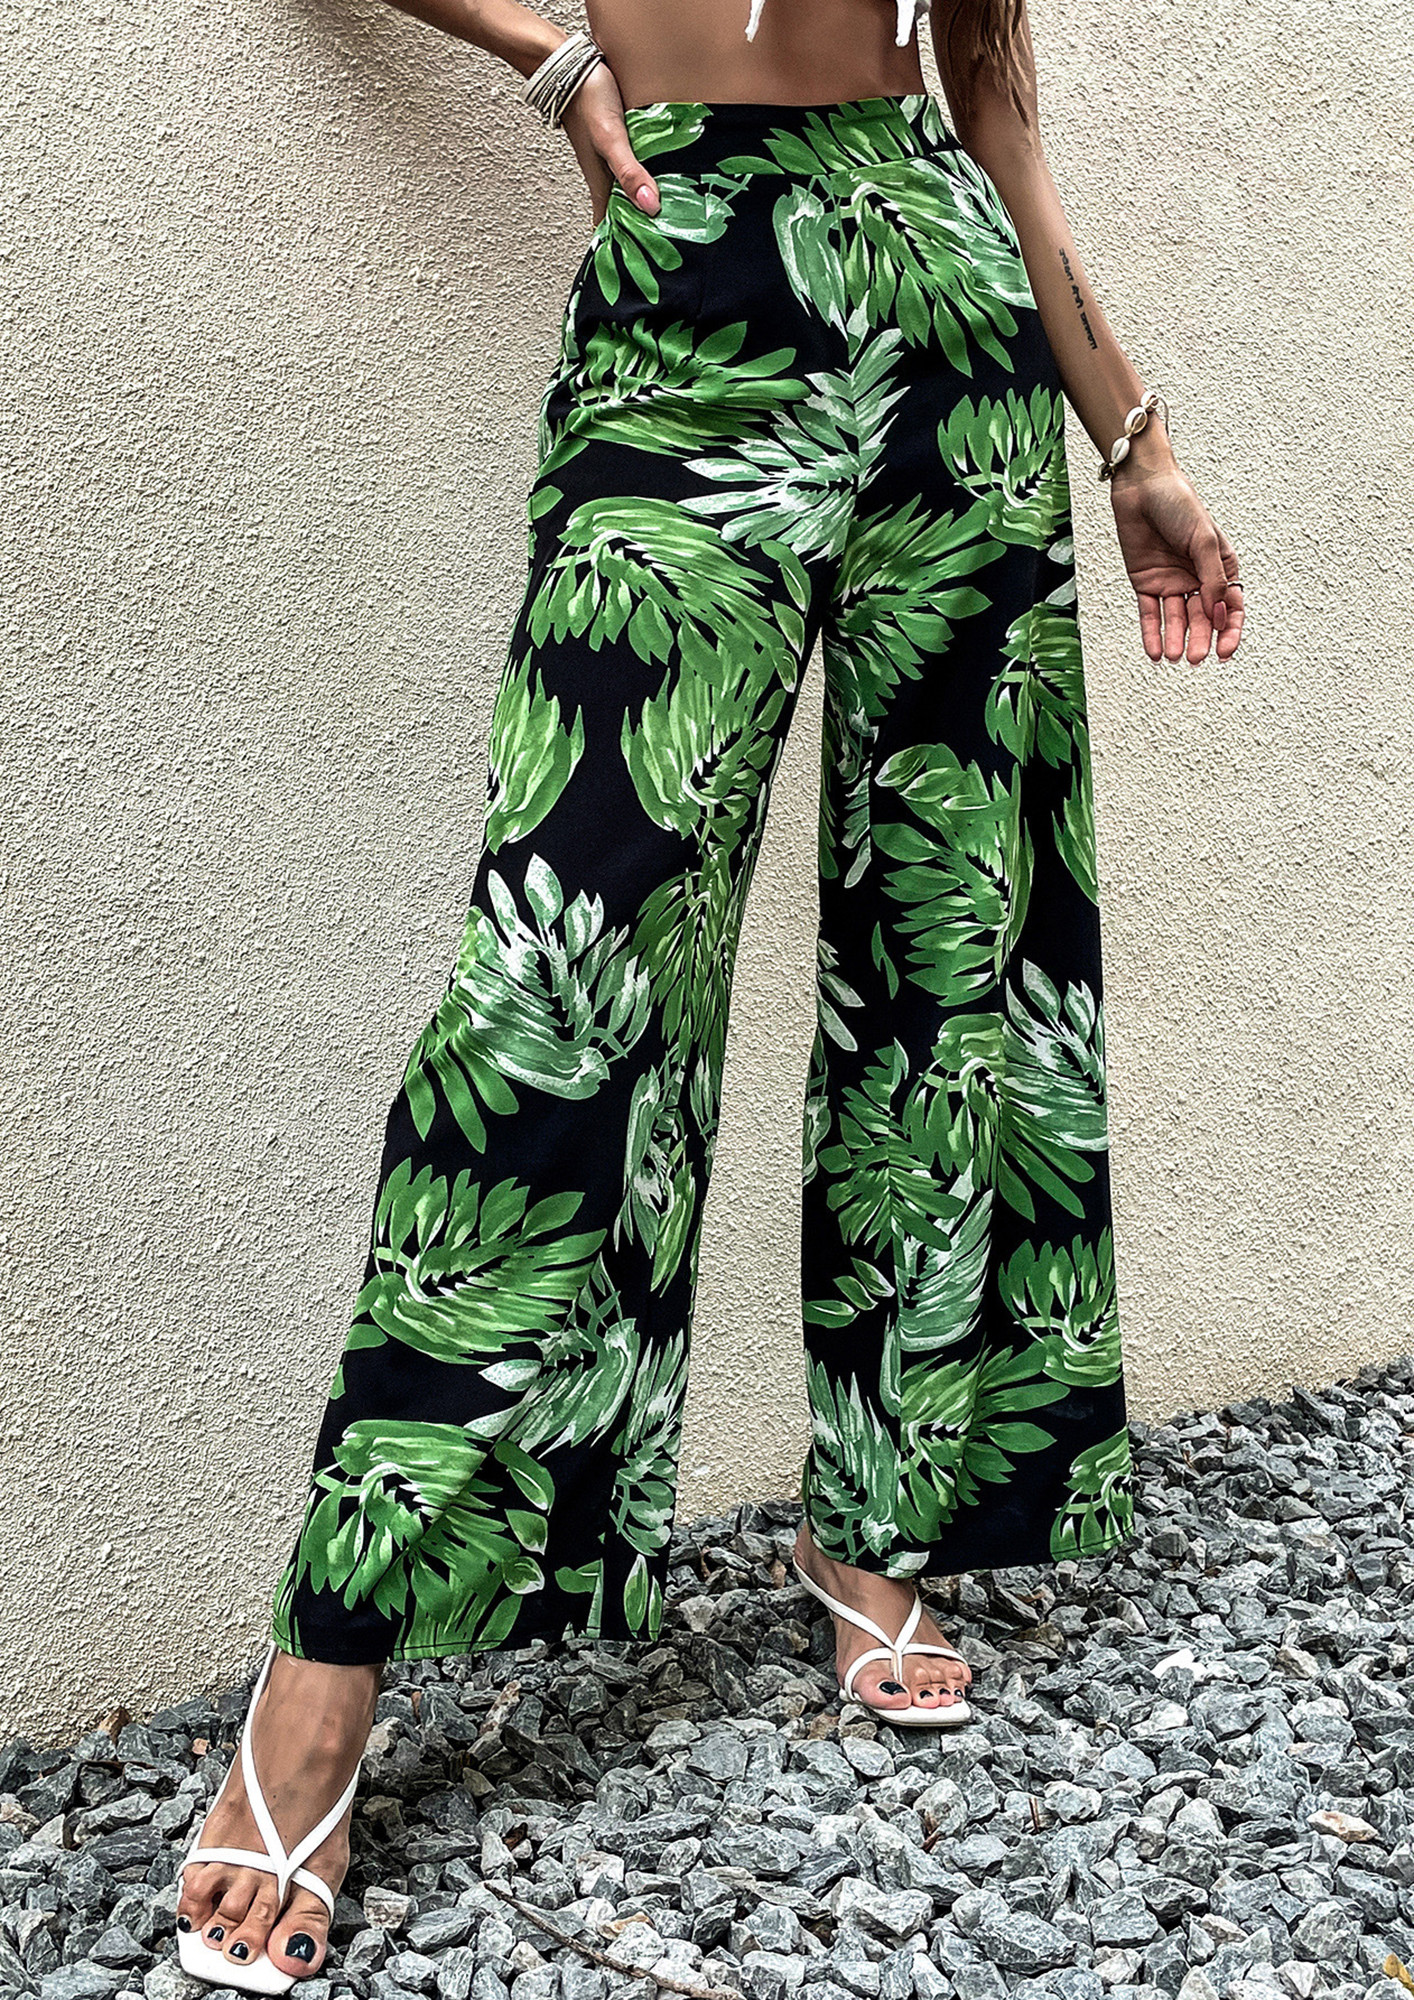 Anouk Women Black  White Ethnic Motifs Printed Trousers Price in India  Full Specifications  Offers  DTashioncom